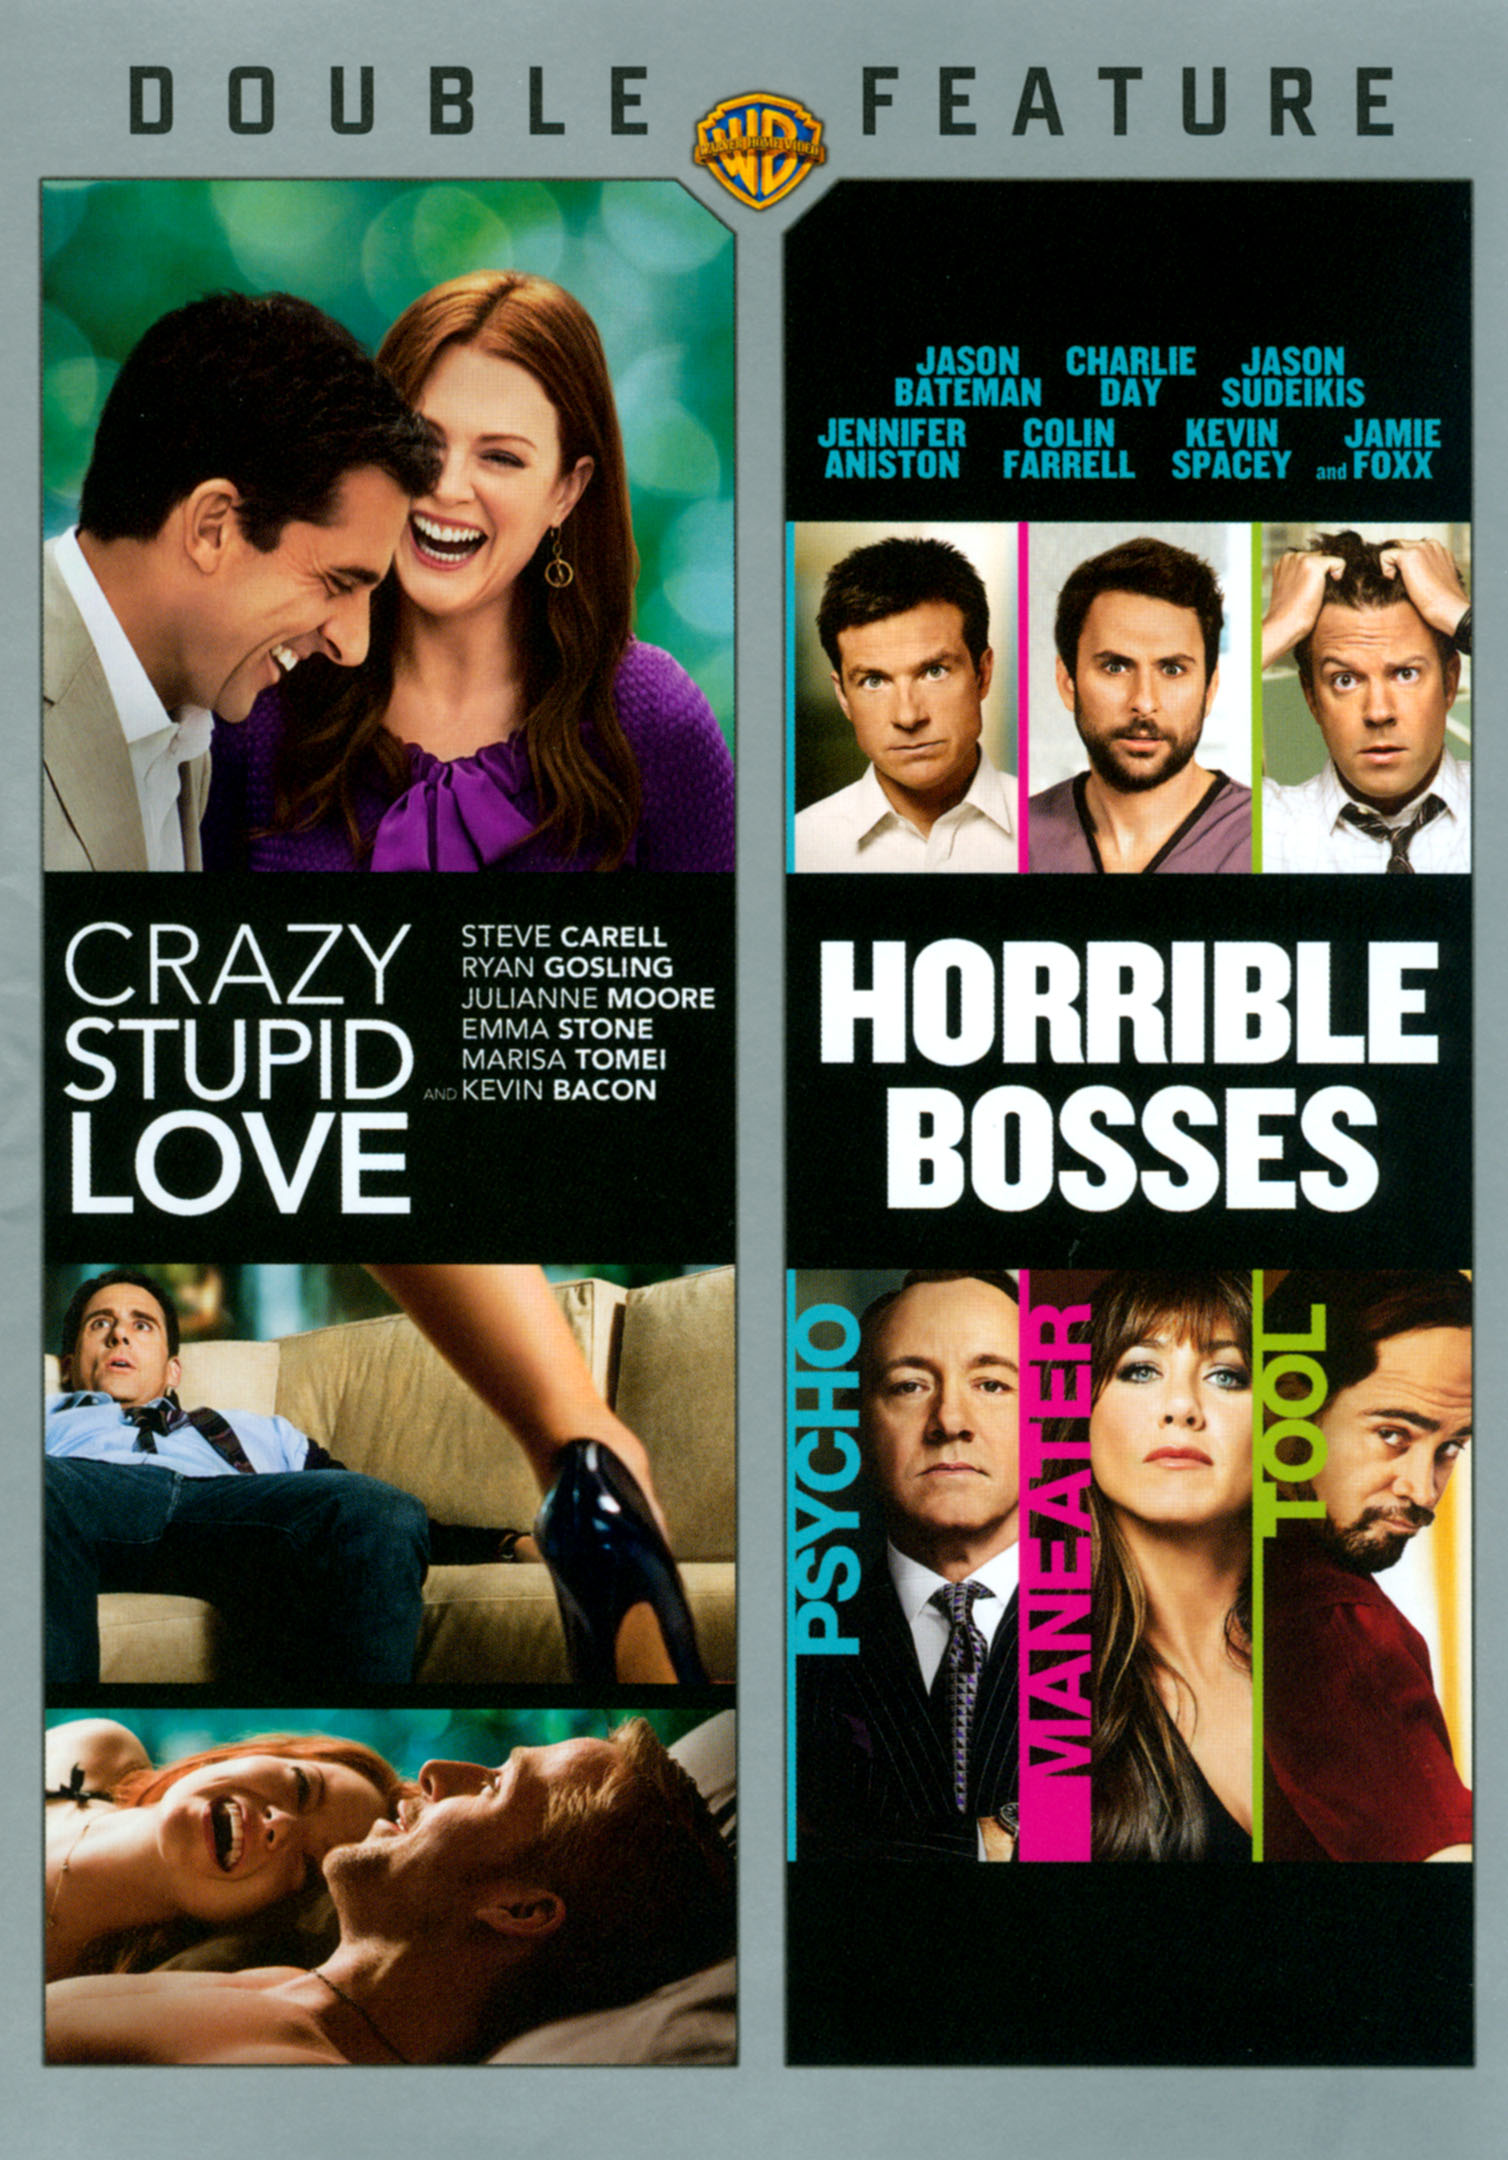 Crazy, Stupid, Love [Articles] - IGN